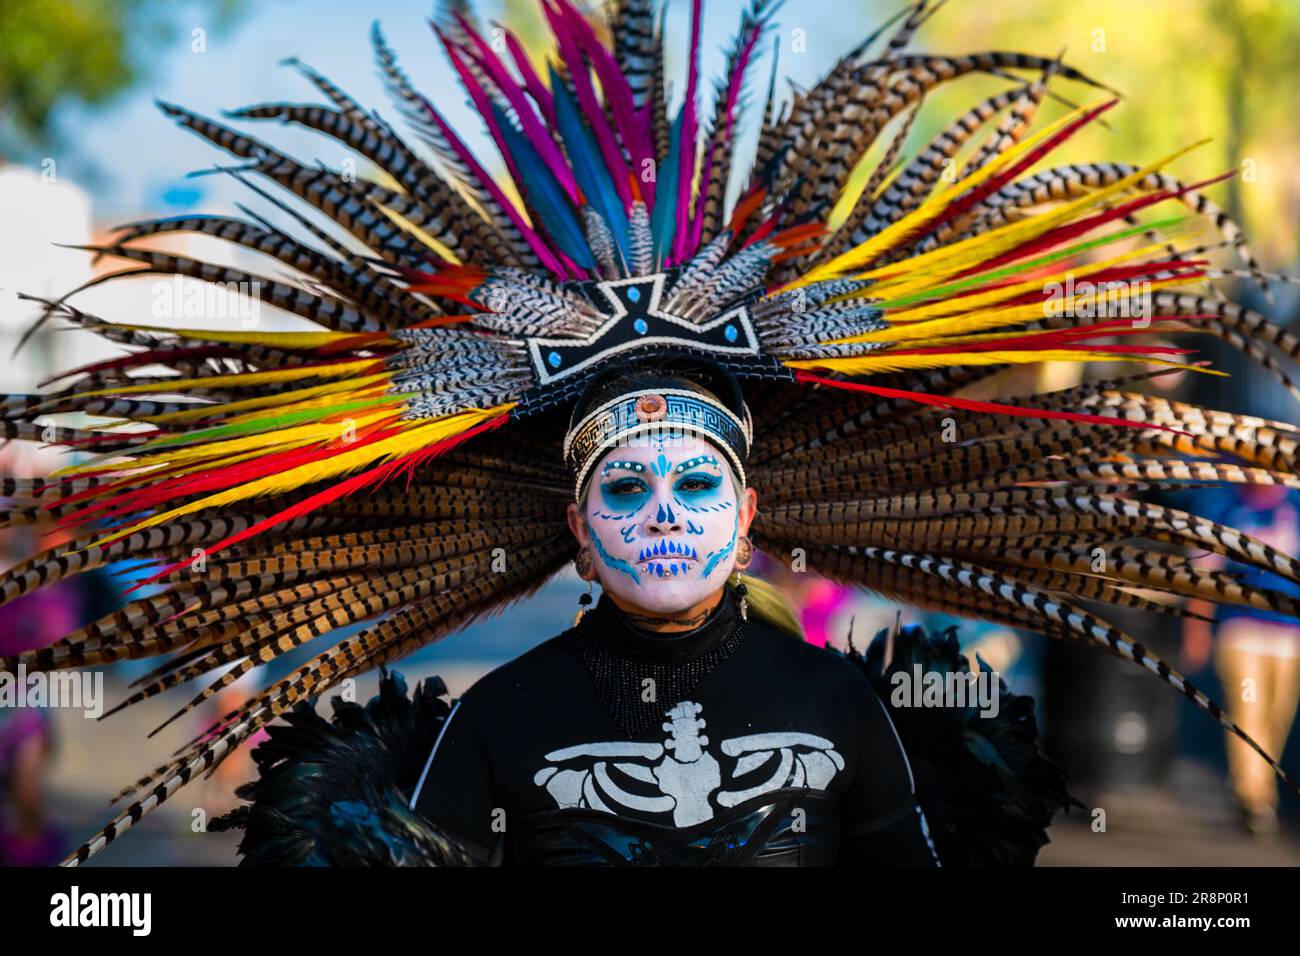 A young Mexican woman, wearing an Aztec feather headdress, takes part in the Day of the Dead festivities in Guadalajara, Jalisco, Mexico. Stock Photo